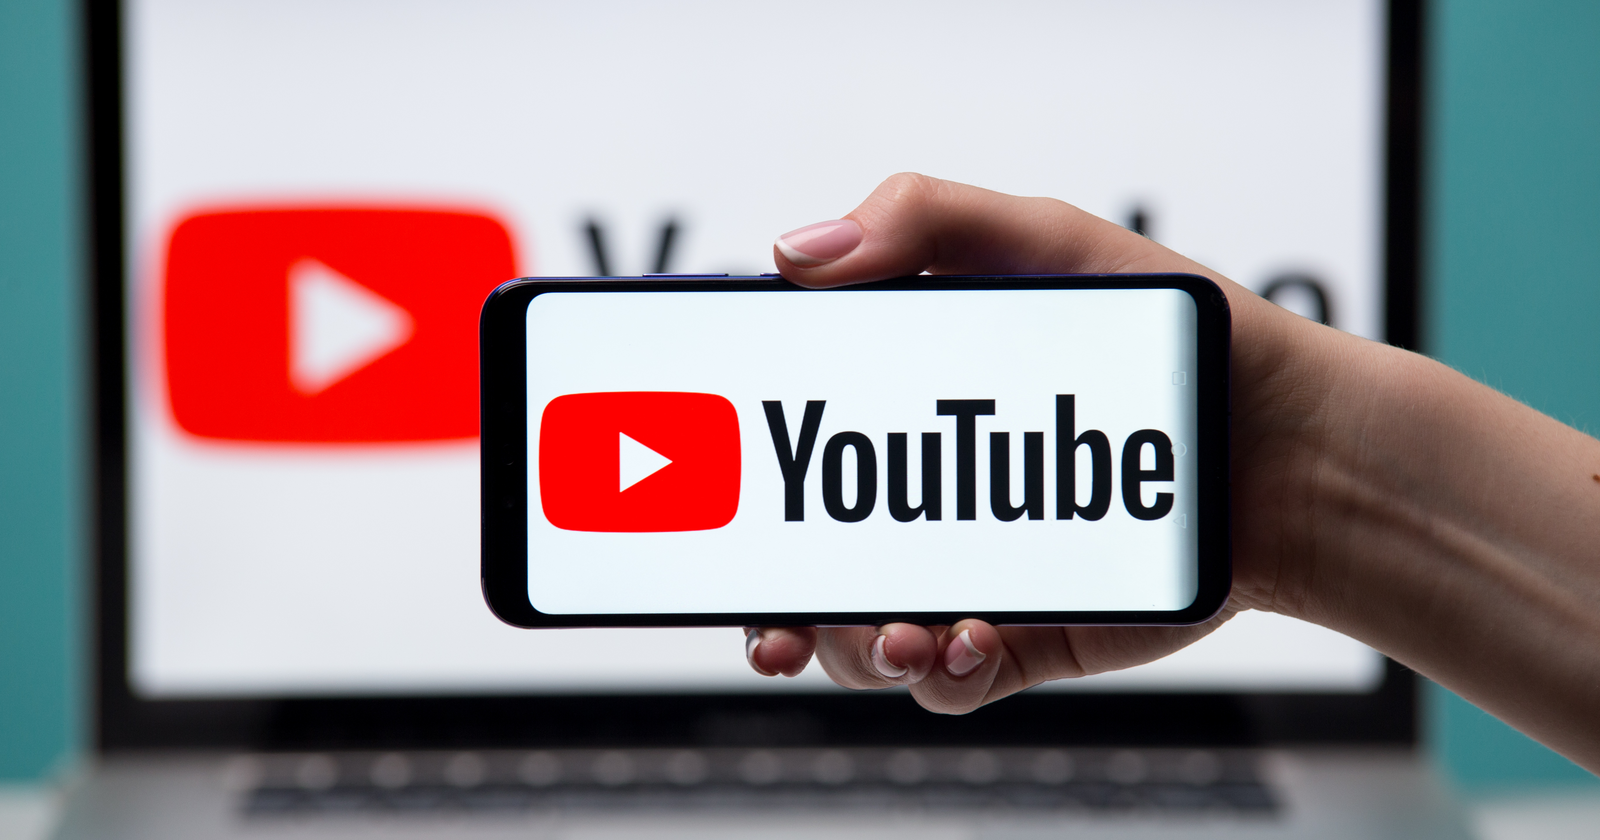 BEST FREE APPLICATION TO DOWNLOAD YOUTUBE VIDEOS